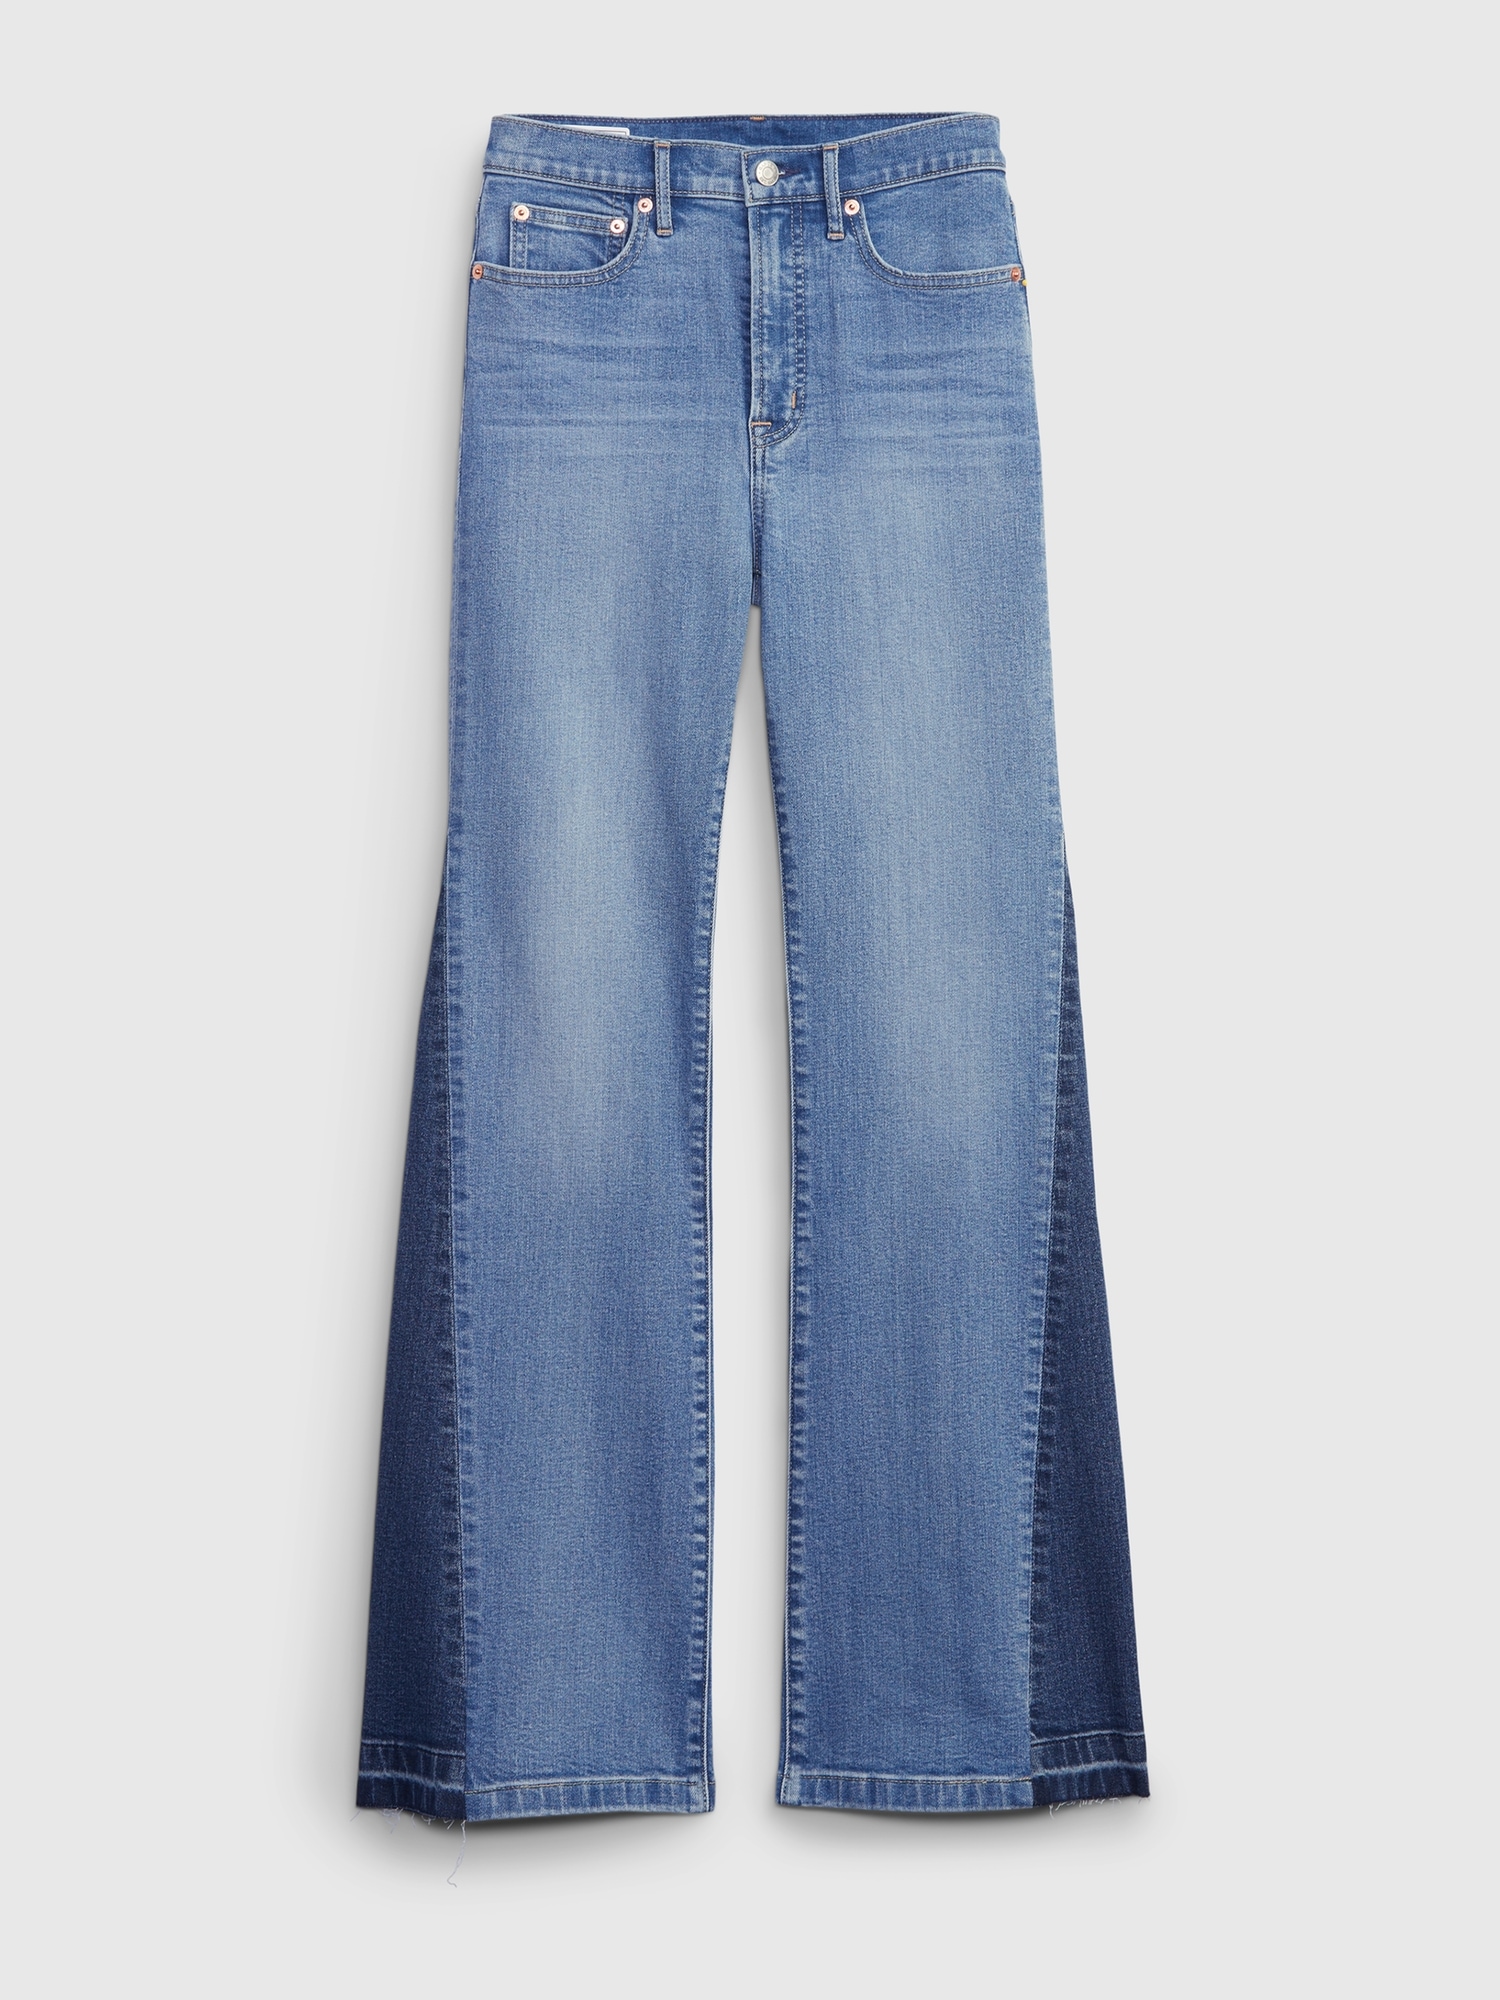 High Rise \'70s Flare Jeans Gap 